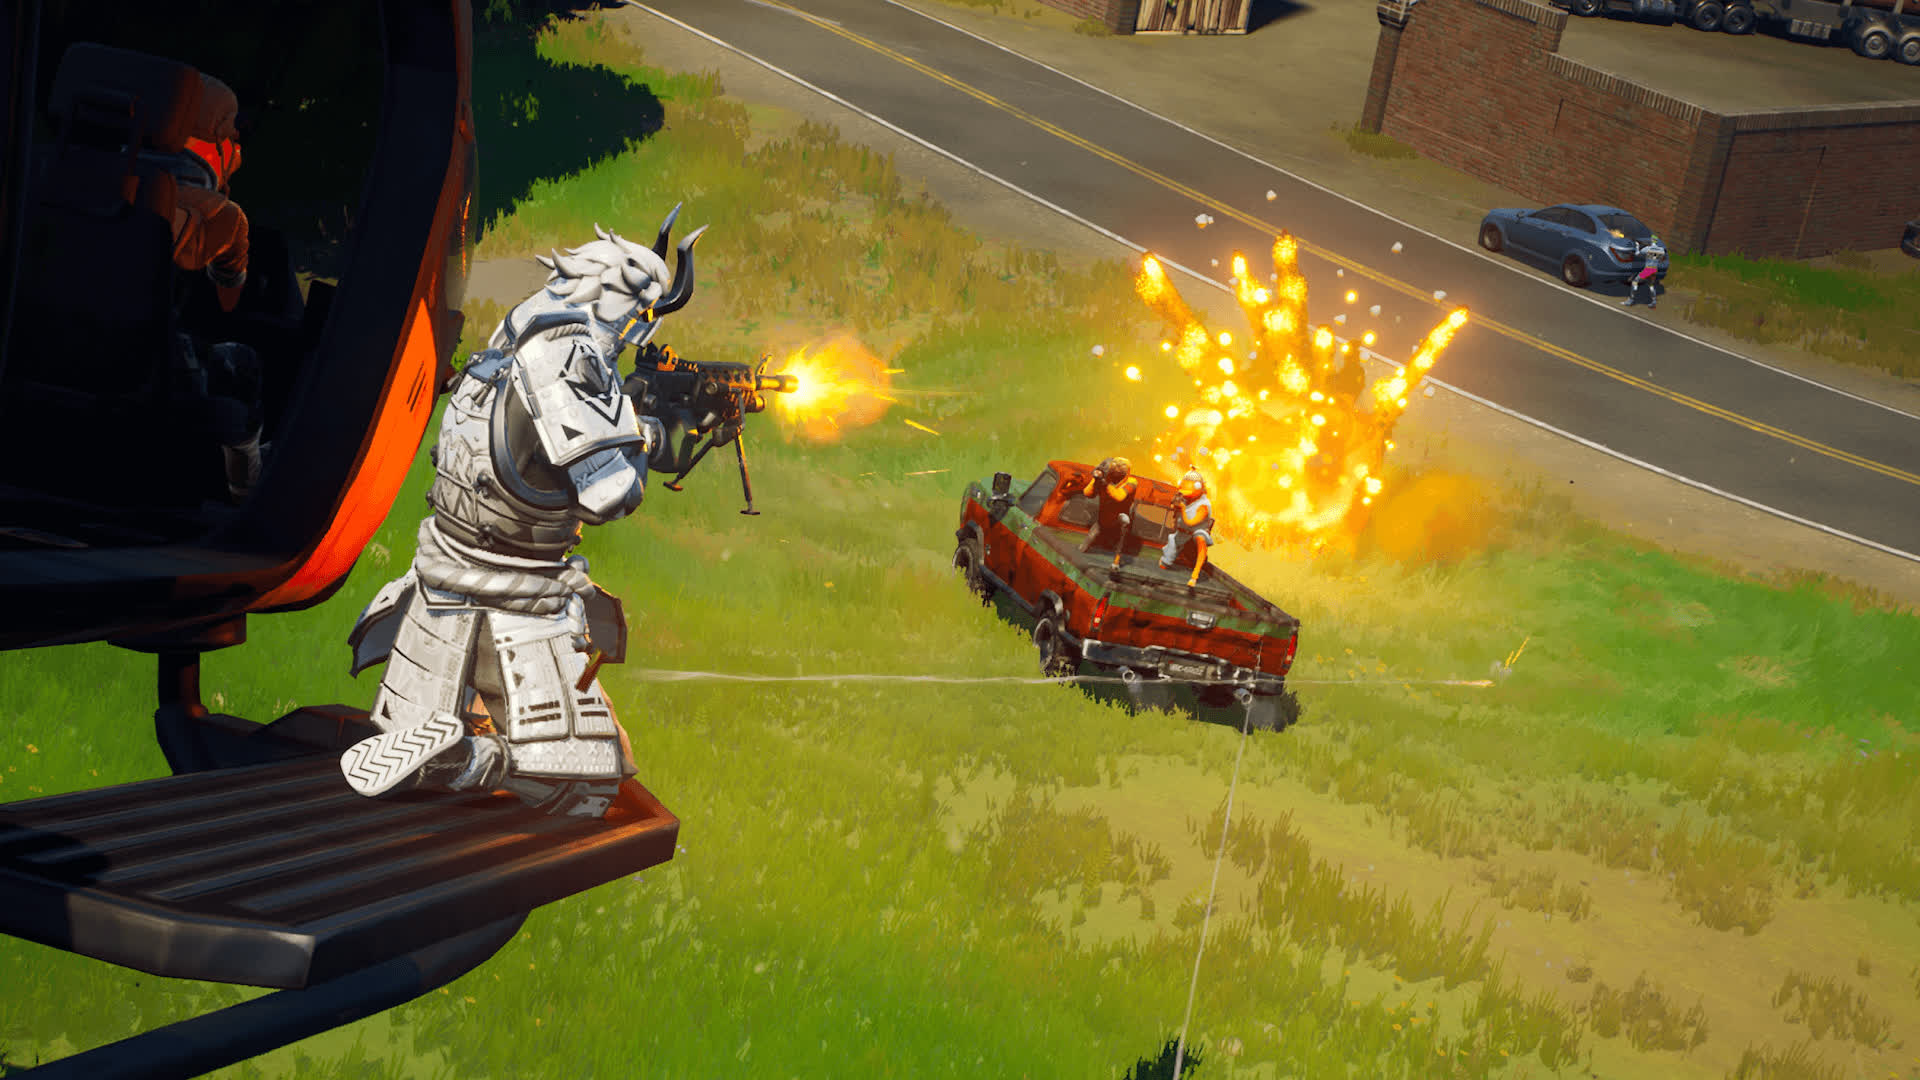 Fortnite is about to get a major visual upgrade on PC